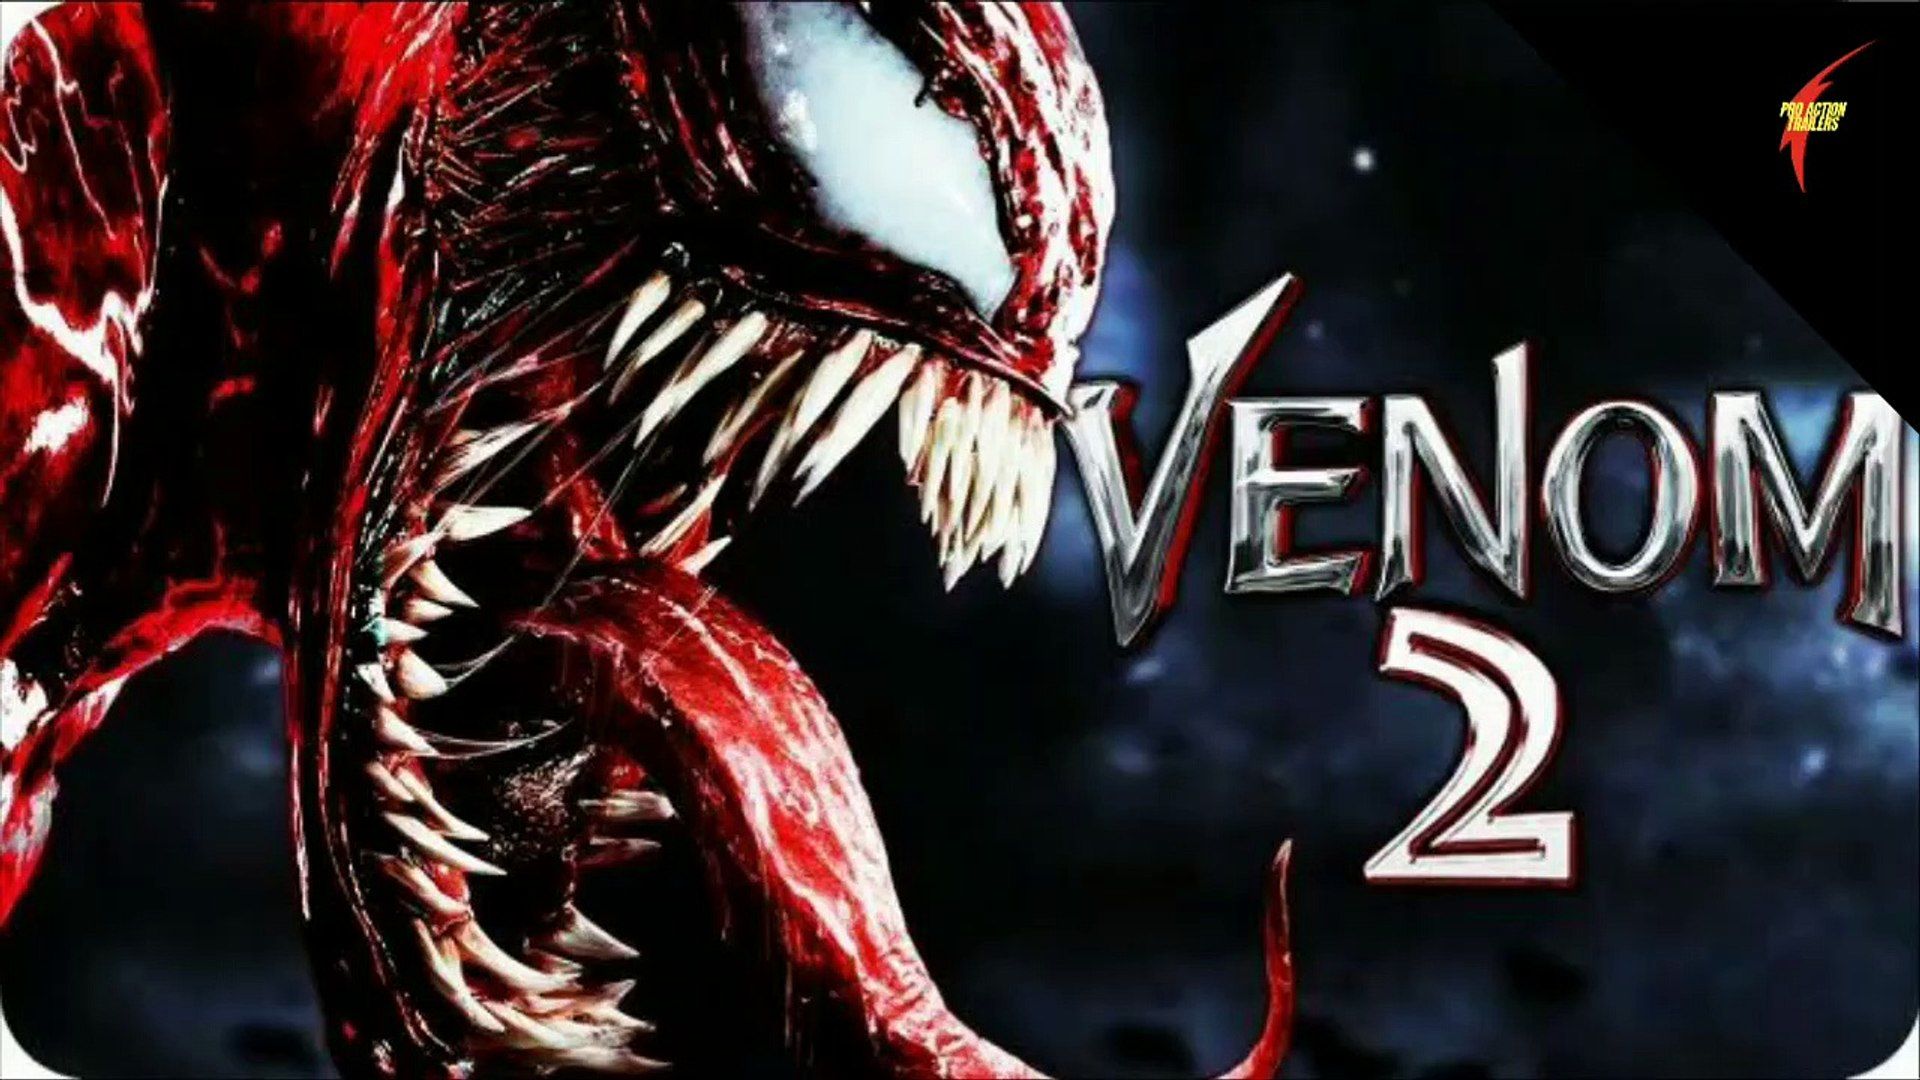 VENOM 2: Let there be CARNAGE official Teaser TRAILER HD 2021